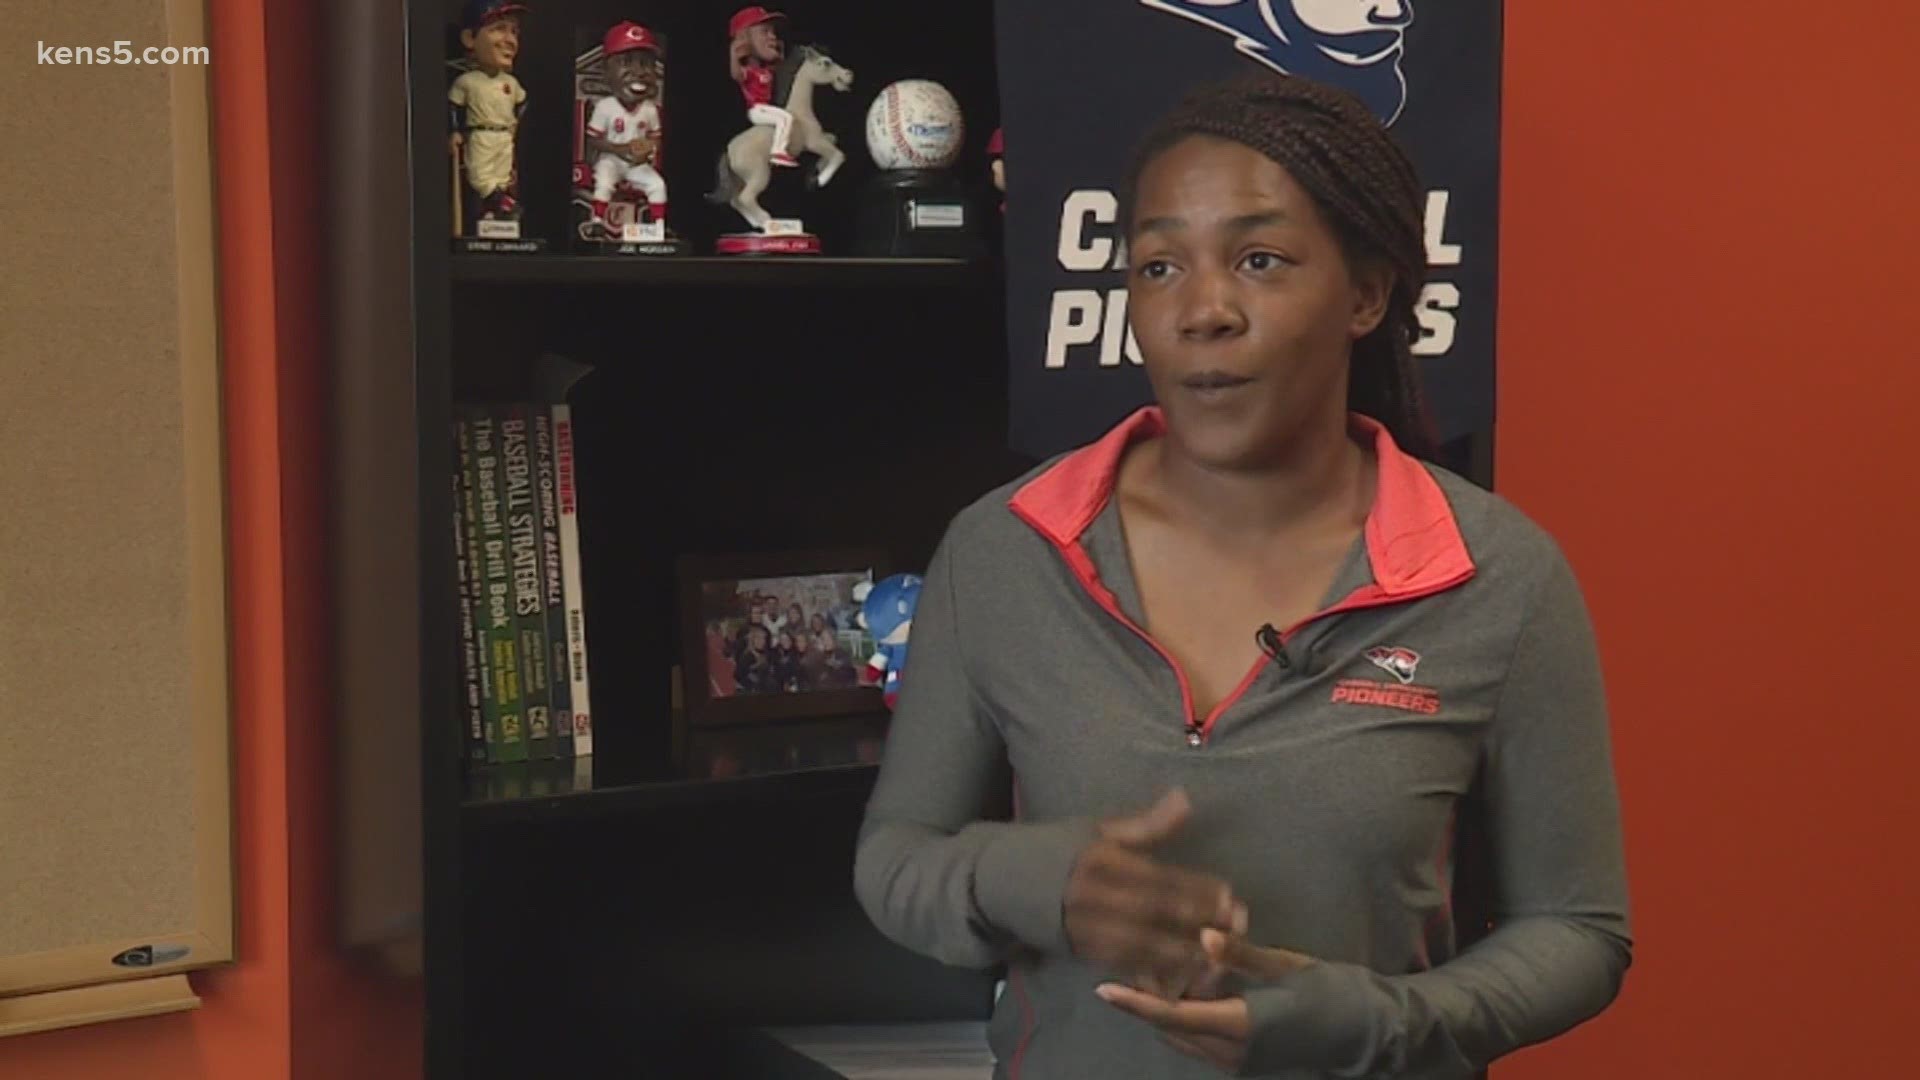 History is made in baseball! The Boston Red Sox have hired Bianca Smith as a minor league coach making her the first black female coach.